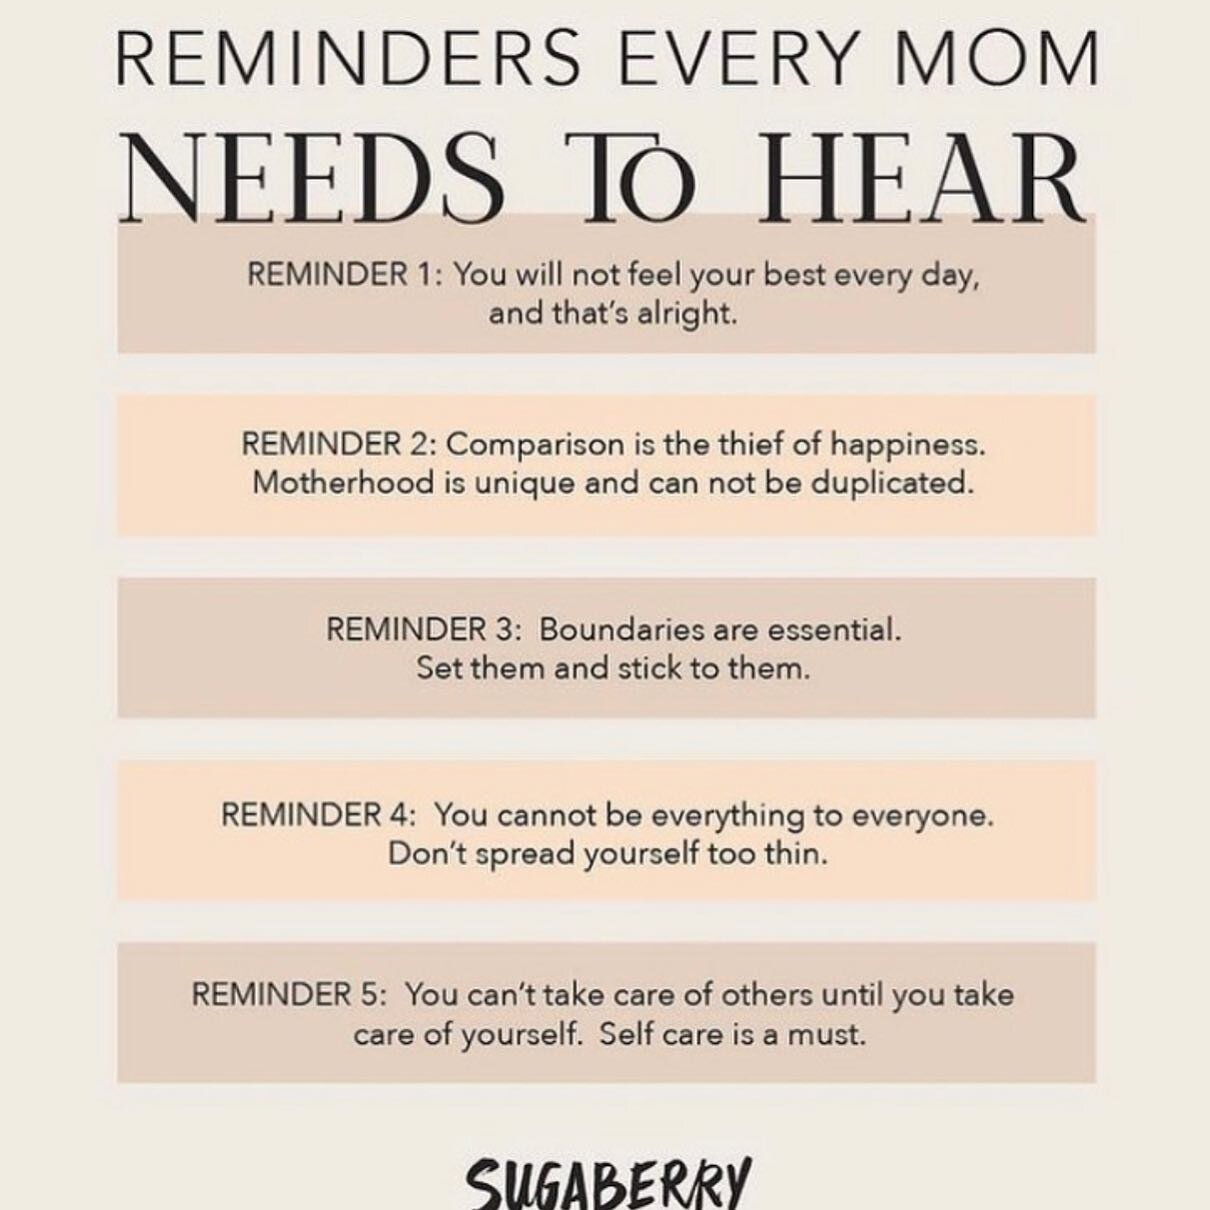 Important reminders that we need to hear now more than ever. This is such a hard season for mothers. Let self care and self compassion lead the way 💗